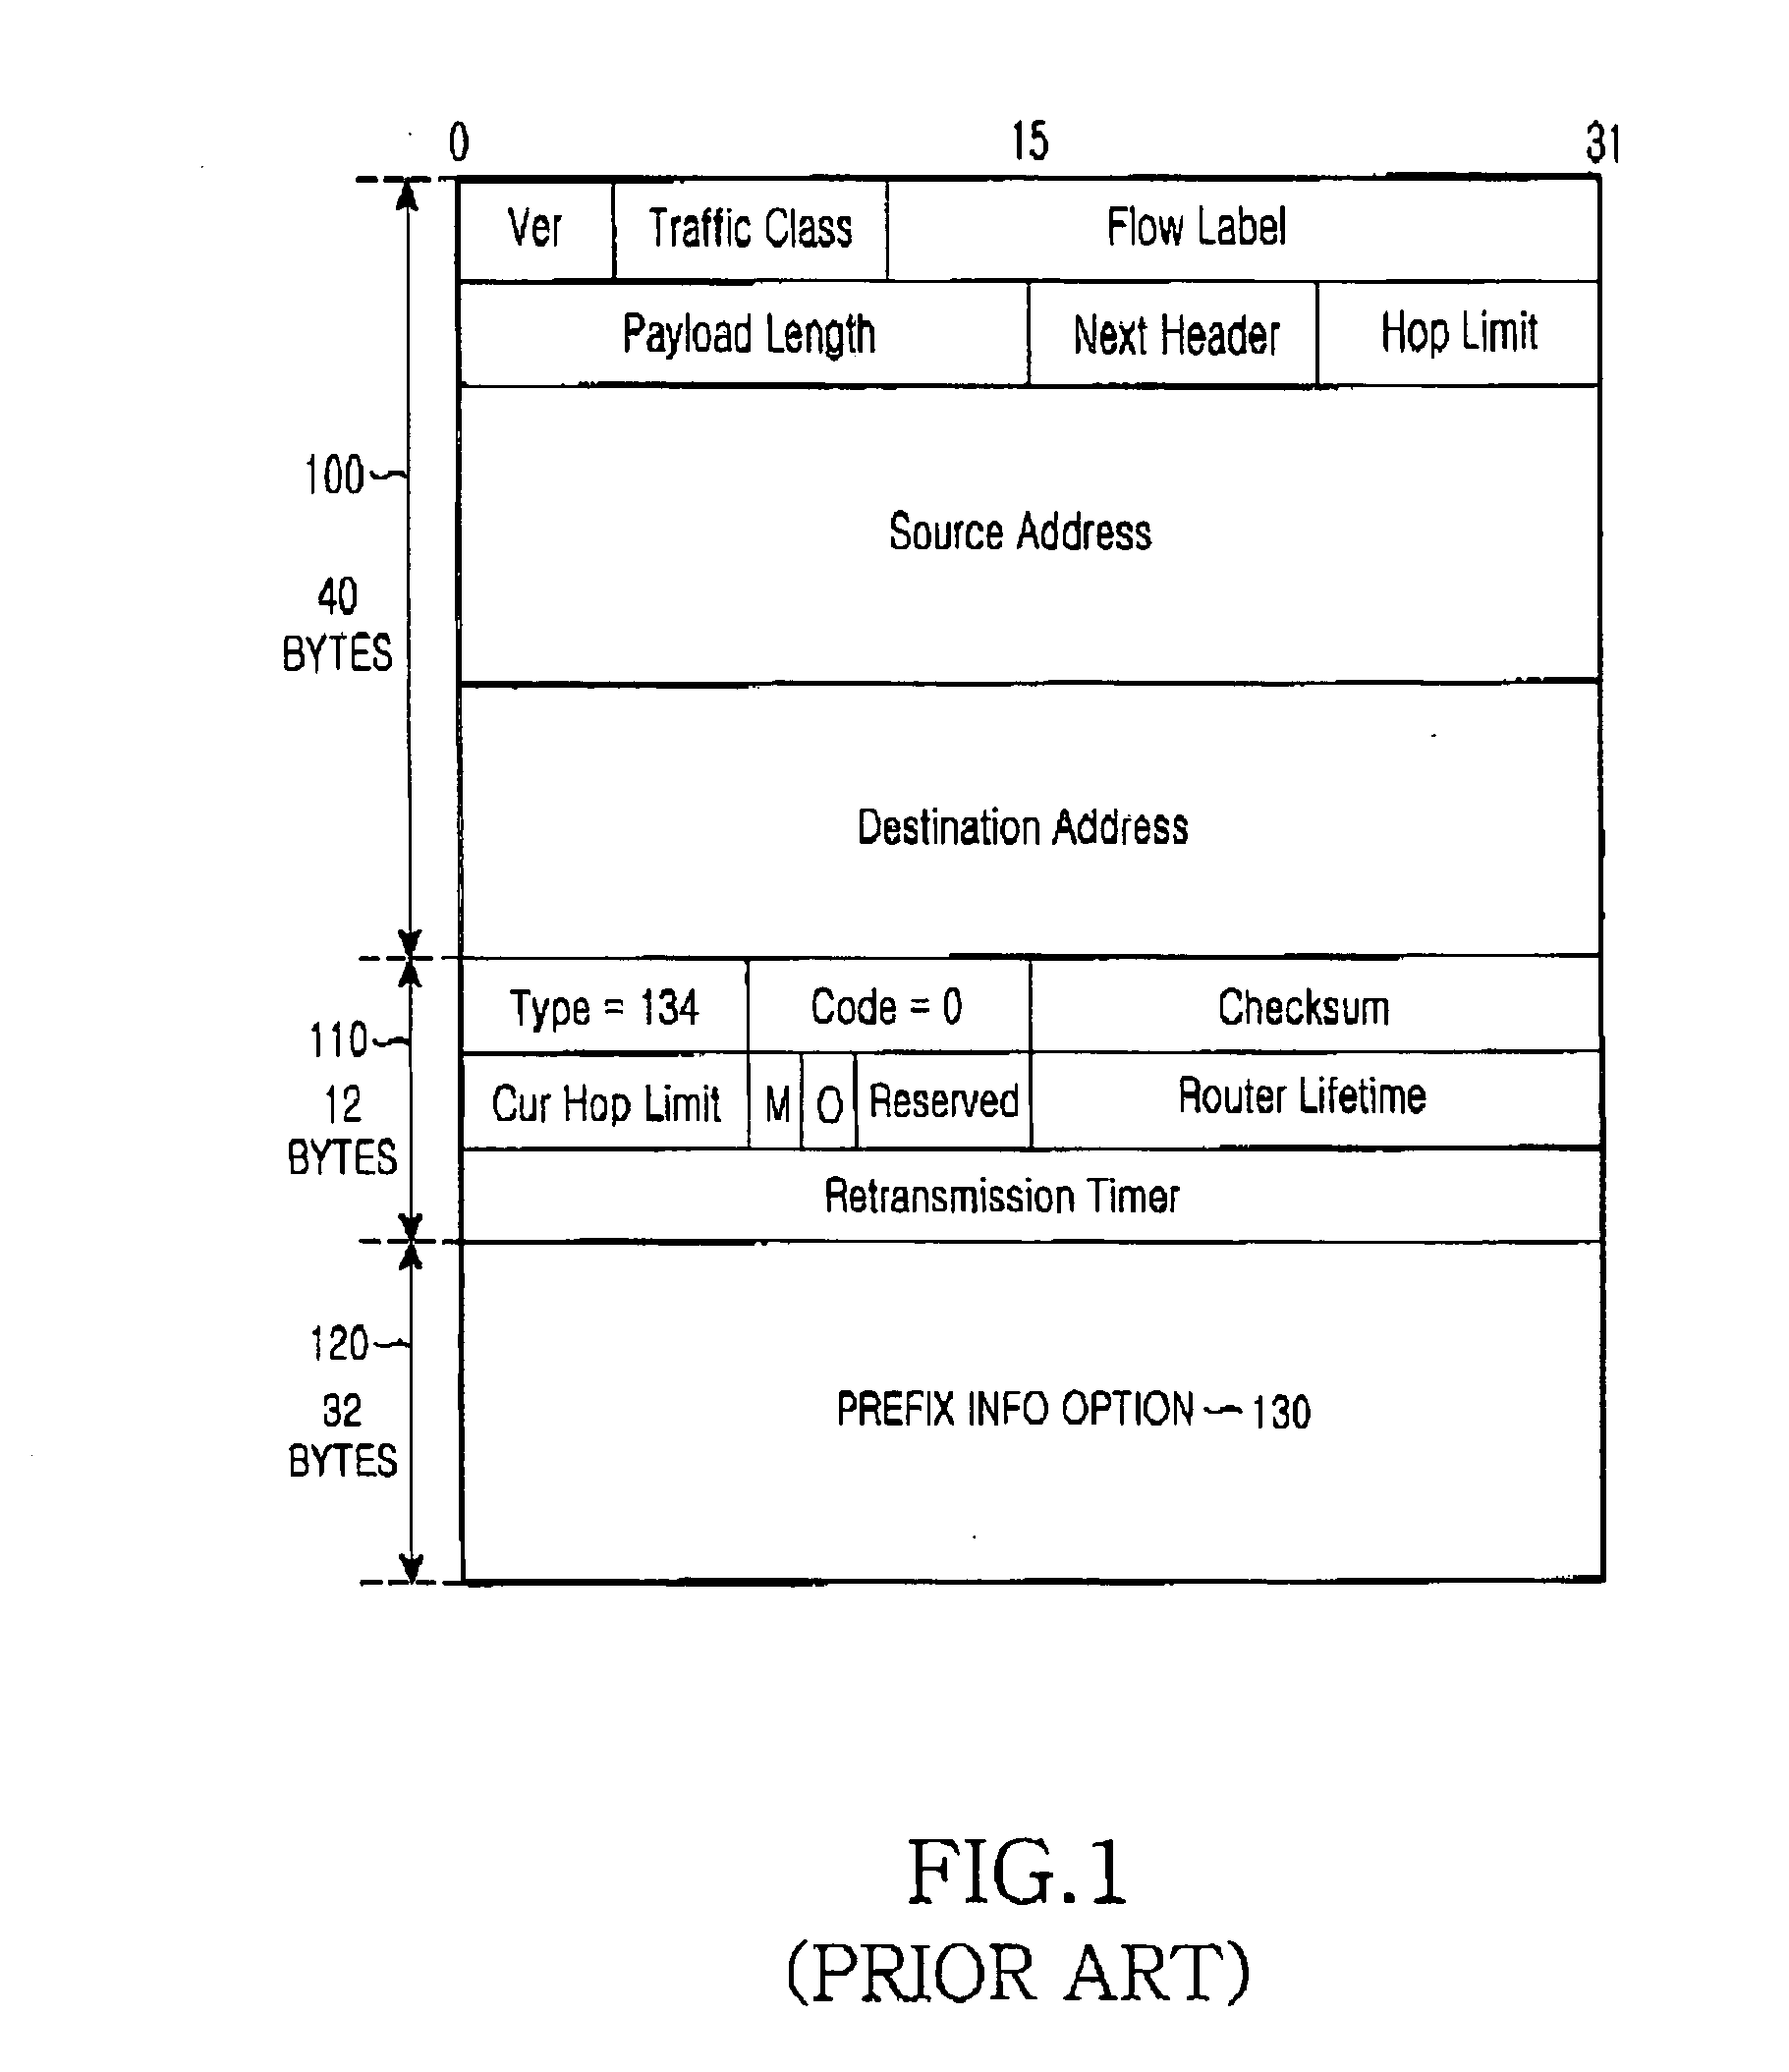 Method and system for generating IP addresses of access terminals and transmitting messages for generation of IP addresses in an IP system